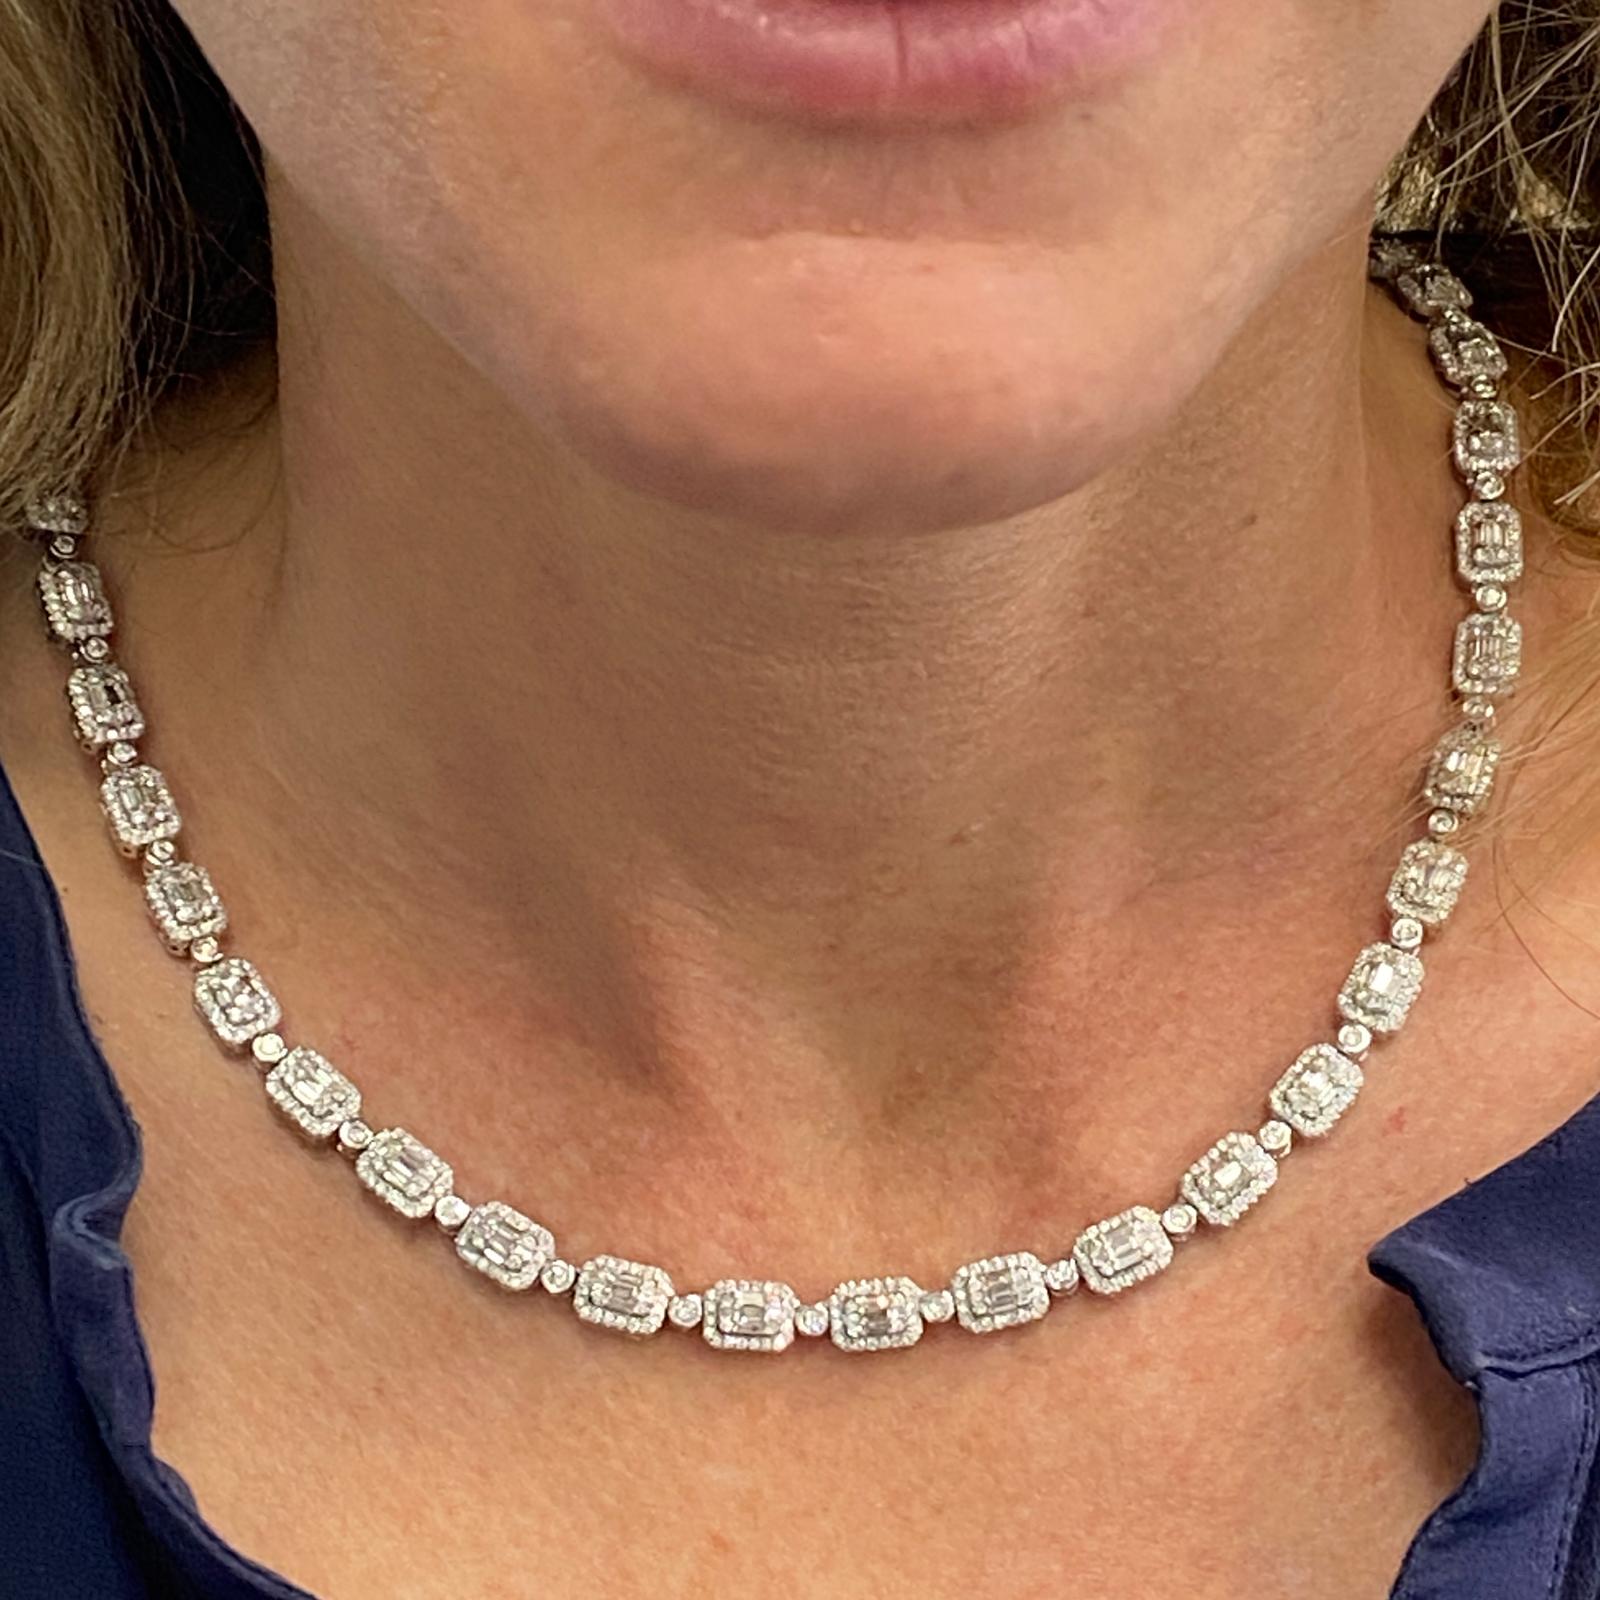 Beautiful modern diamond link necklace fashioned in 14 karat white gold. The necklace features 12.30 carat total weight of round and baguette cut diamonds. The diamonds are graded H-I color and SI clarity, and the necklace measures 18 inches in